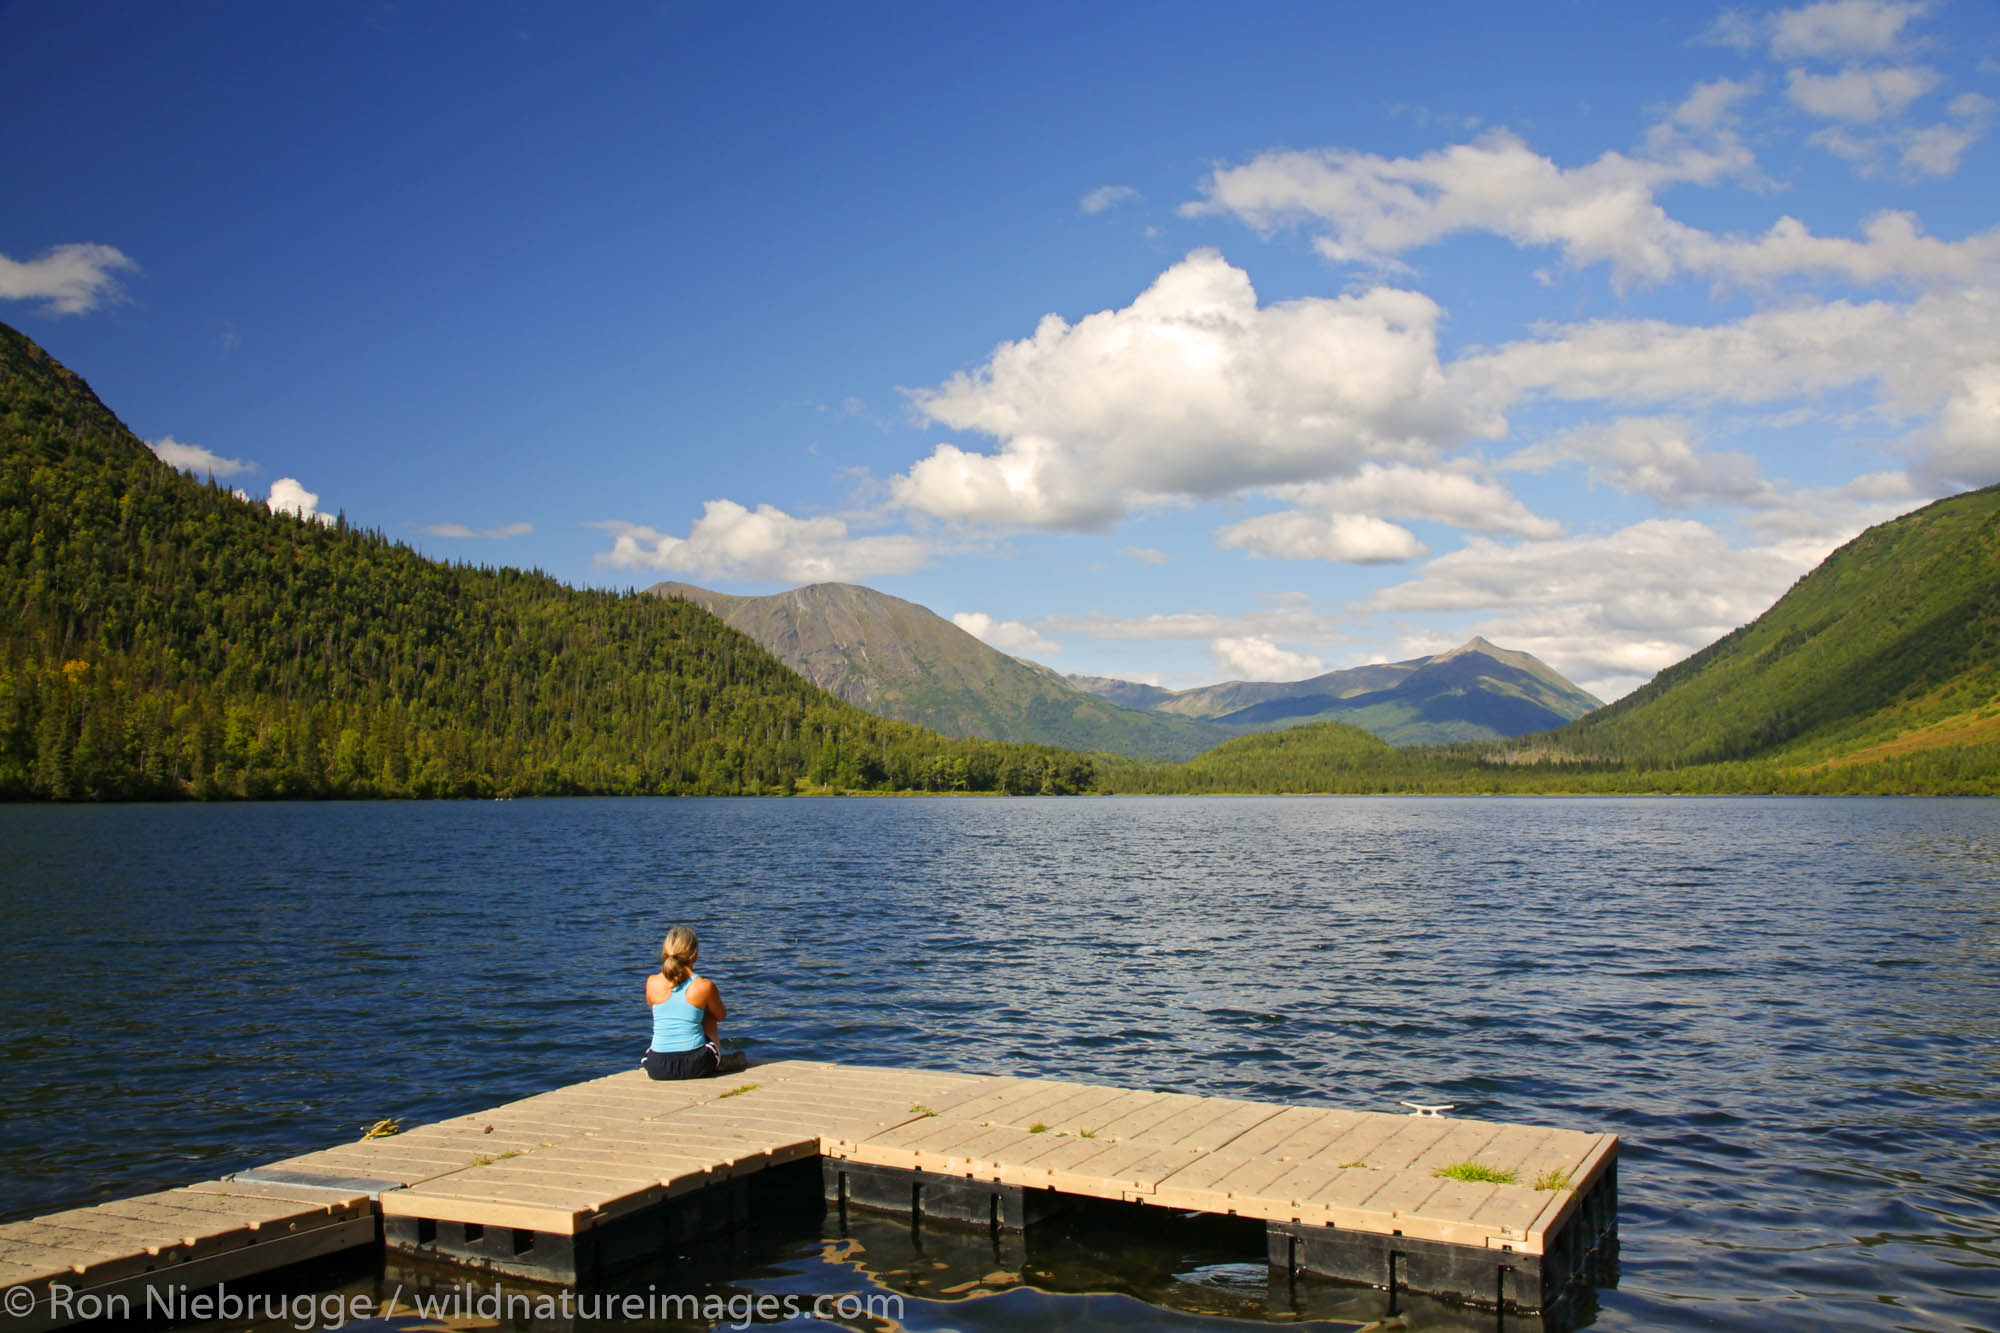 A visitor on the dock at Lower Russian Lake, Russian Lakes-Resurrection River Trail, Kenai Peninsula, Chugach National Forest...